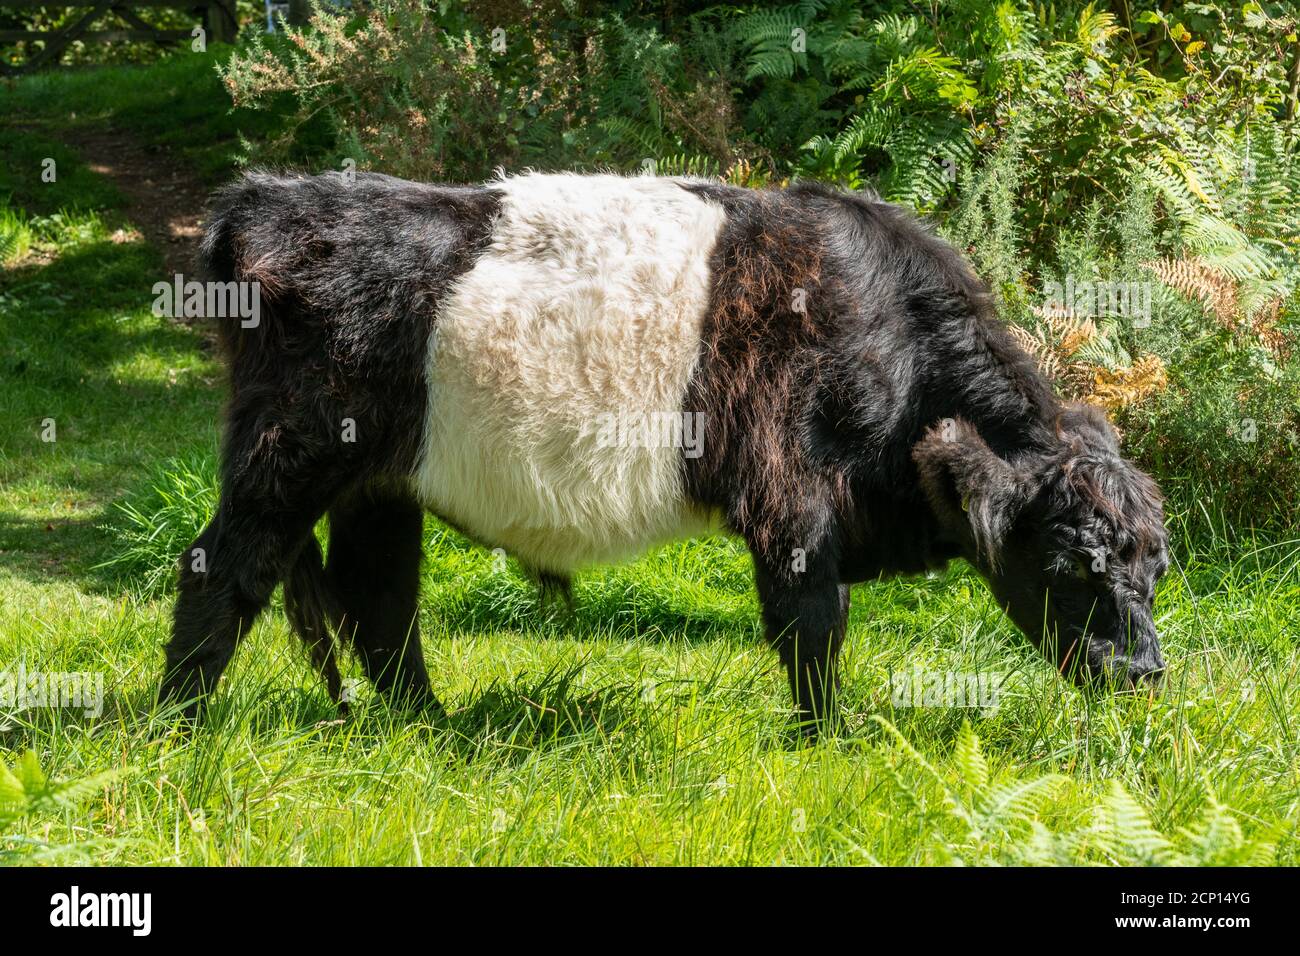 Belted galloway cattle, Scottish hardy beef cattle breed, black with a white band round his middle, being used for habitat vegetation management Stock Photo